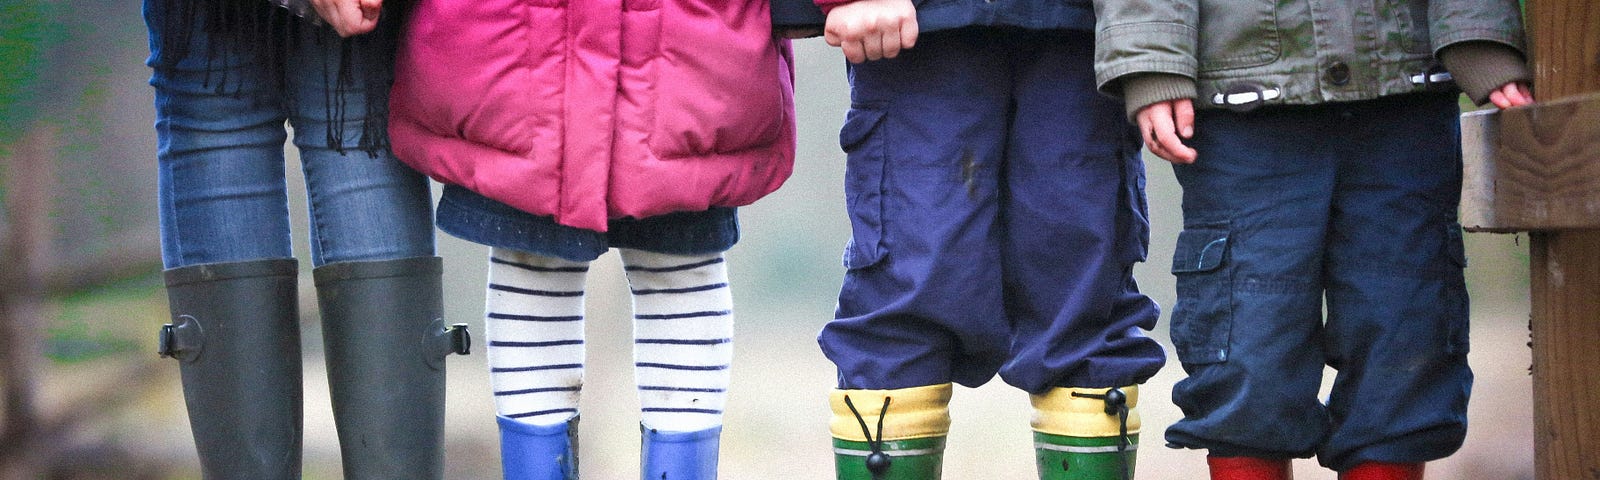 four kids standing together in colorful rubber boots